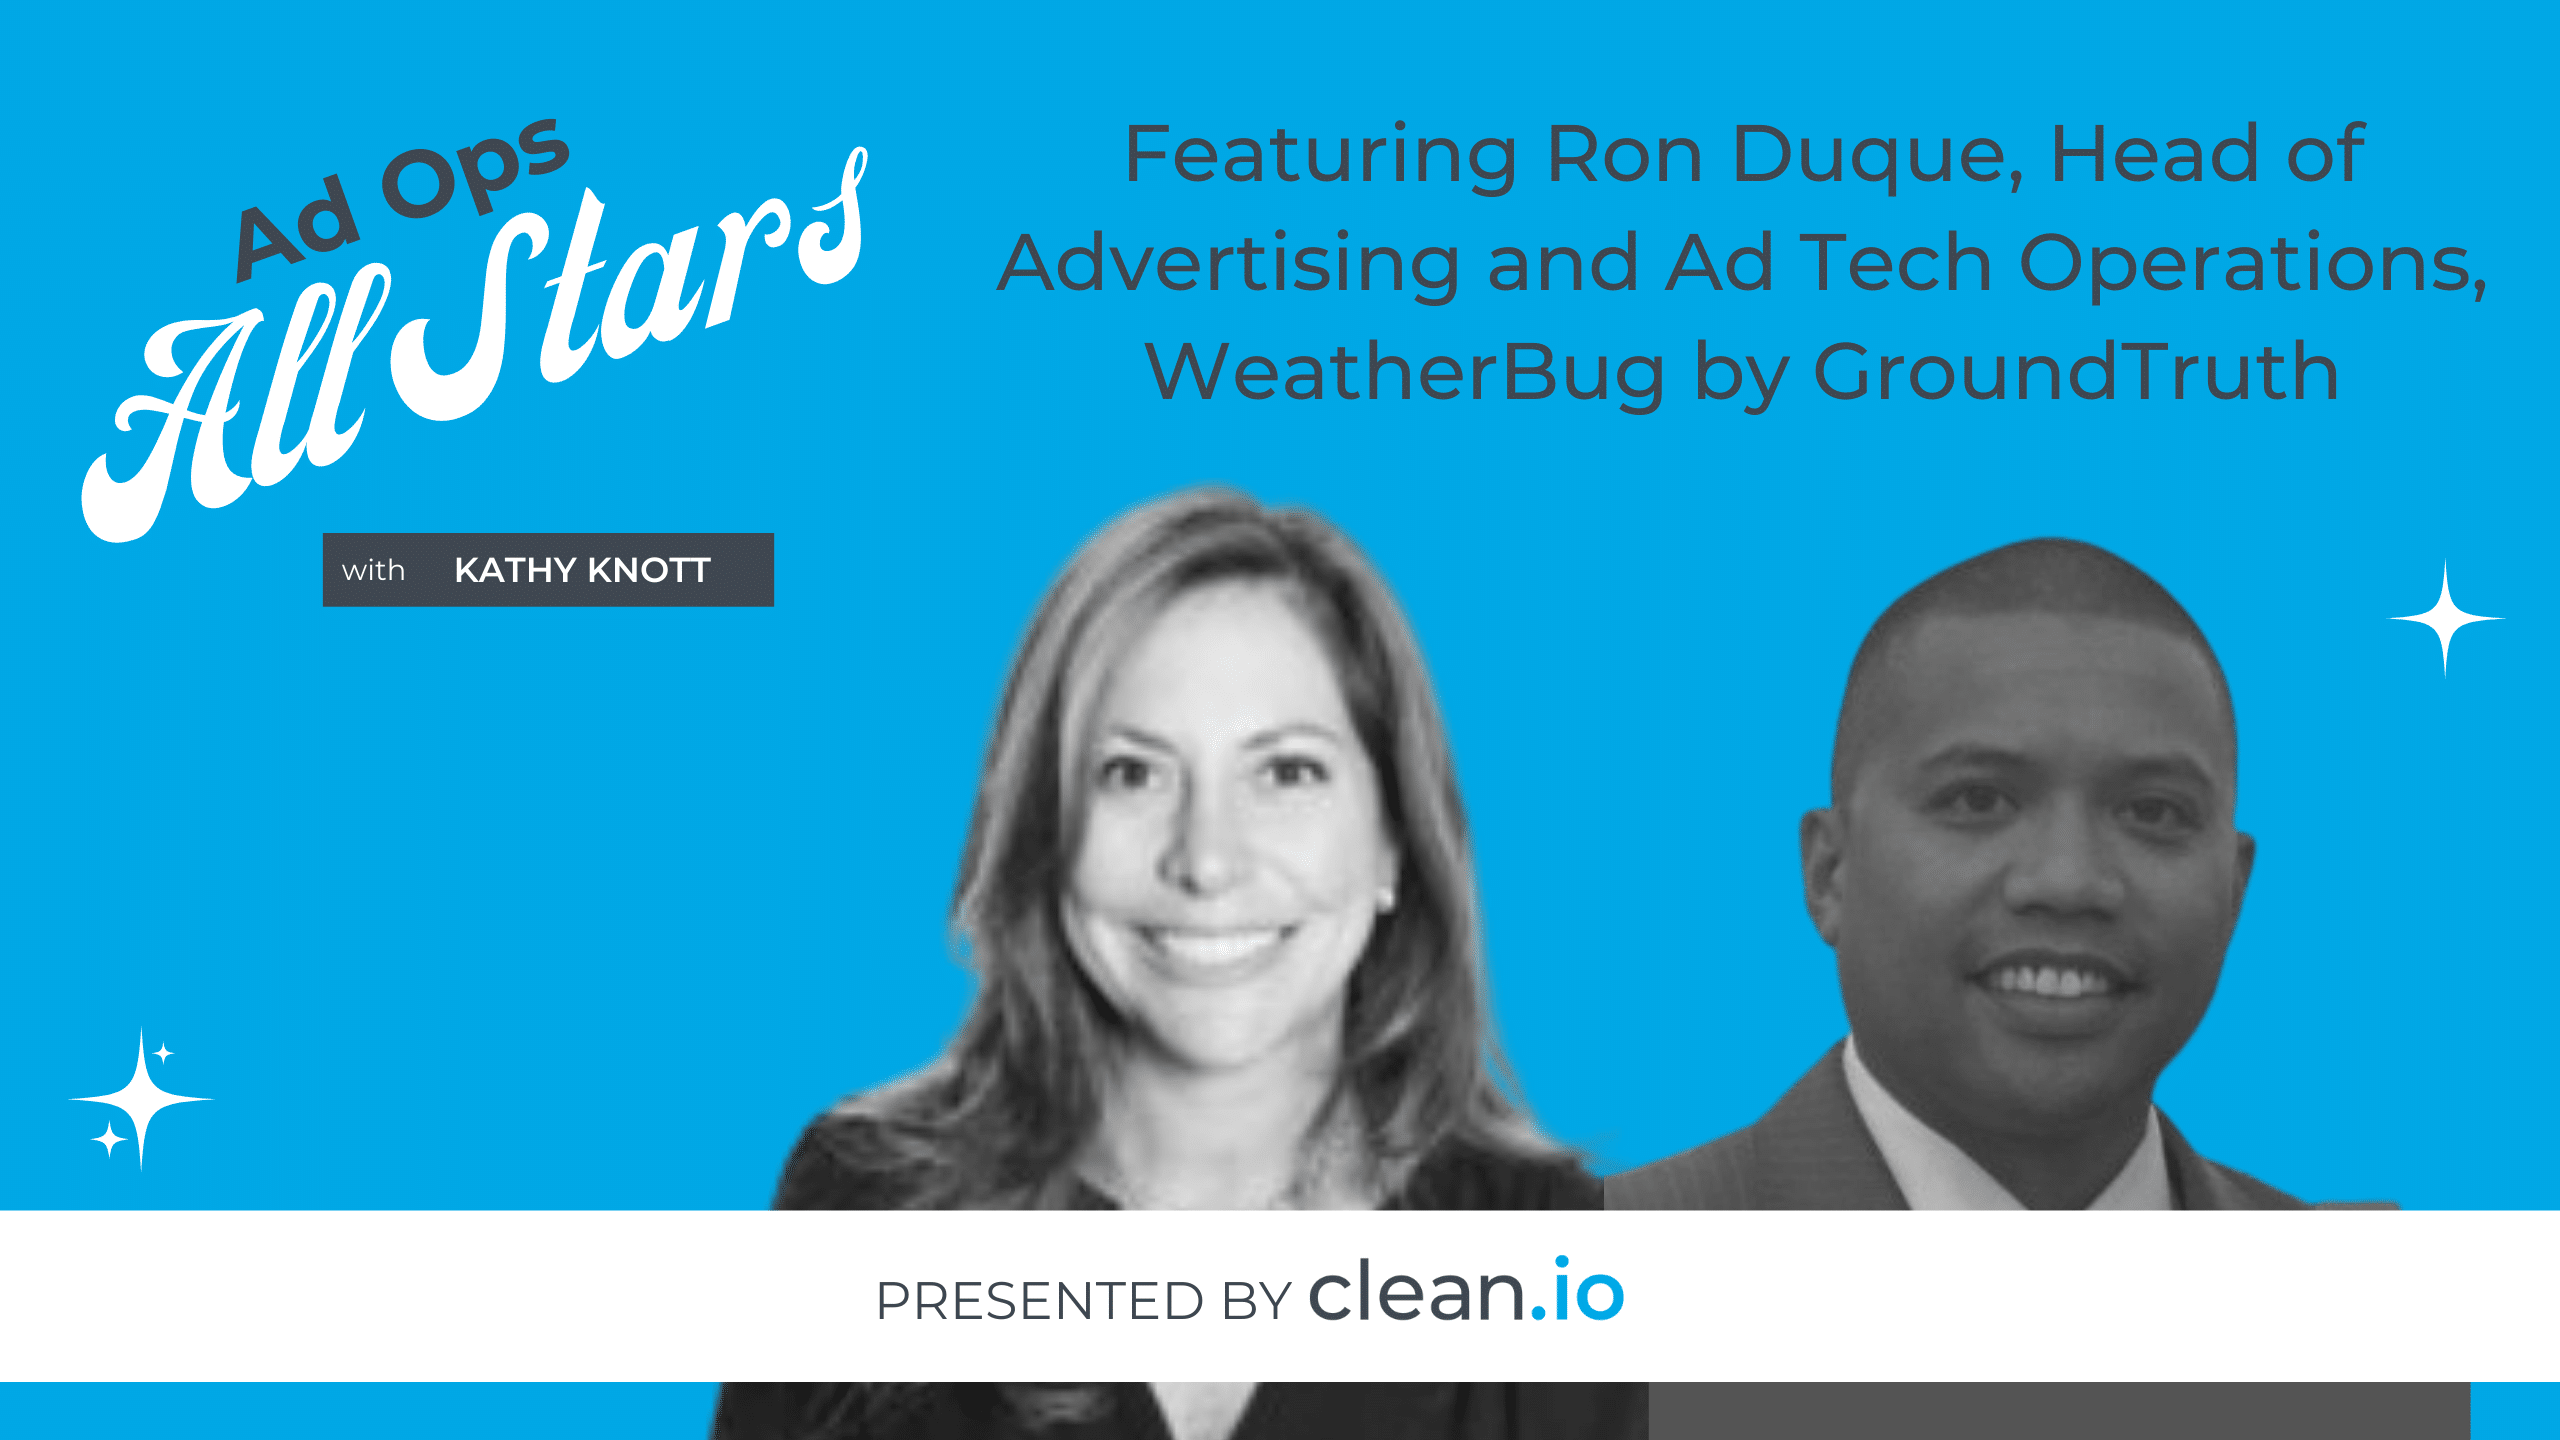 Ad Ops All Stars: Ron Duque, WeatherBug